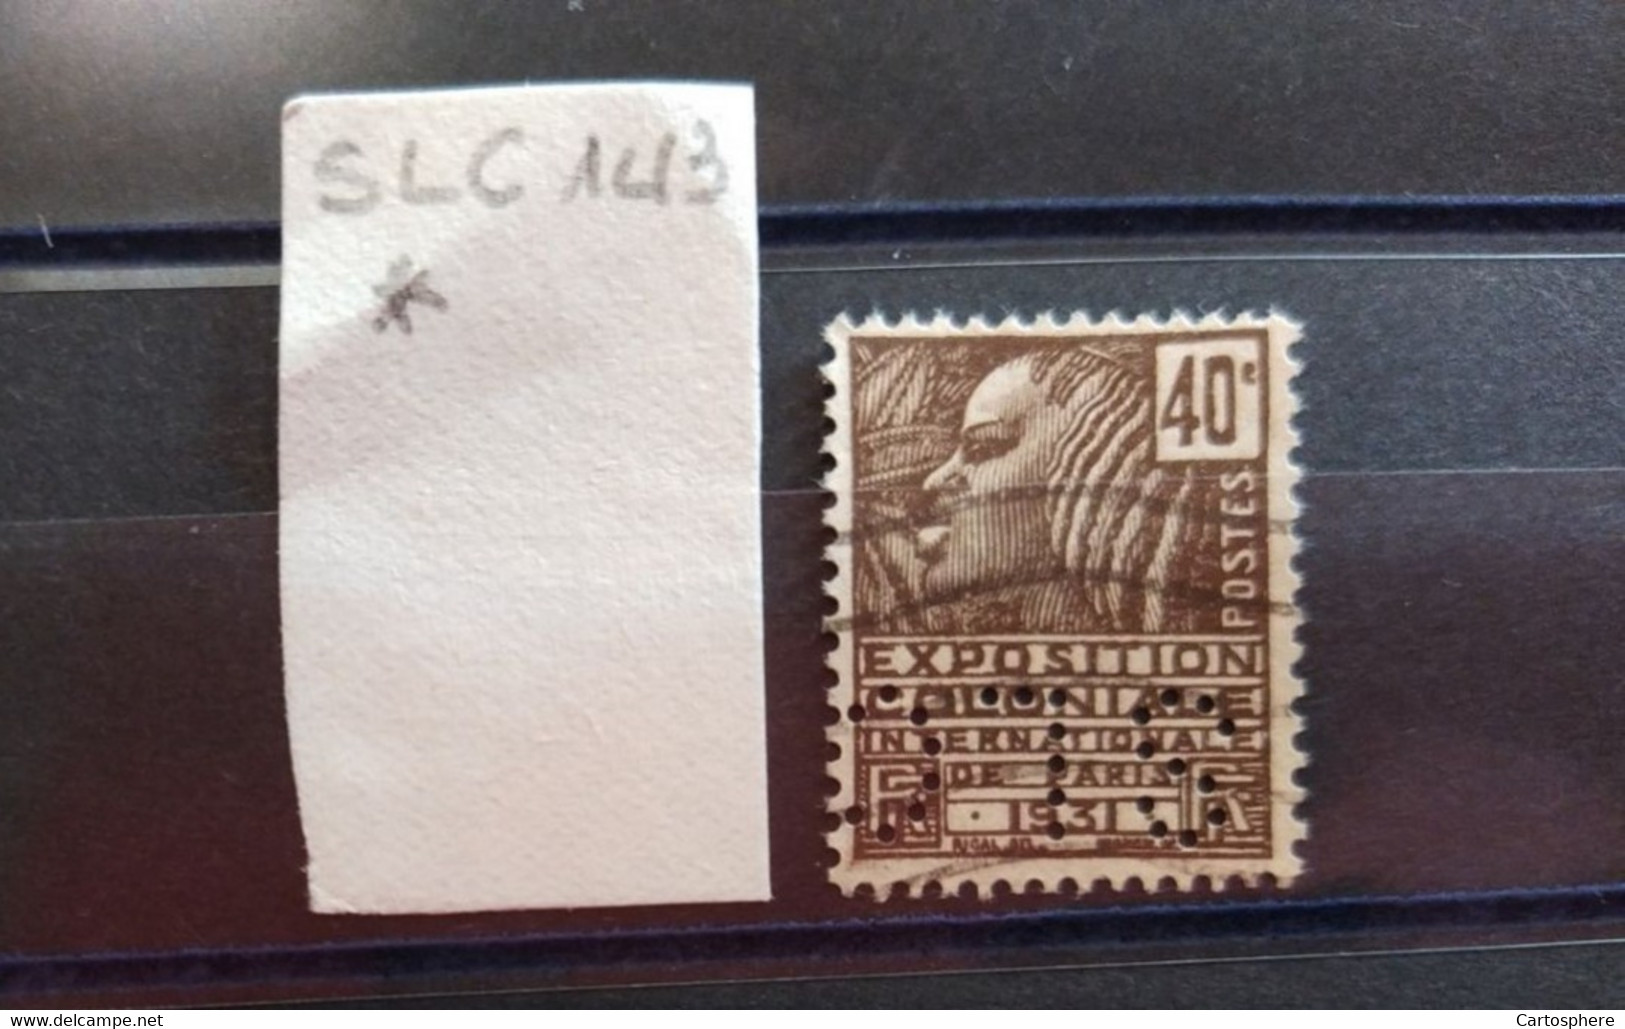 FRANCE SLC 143 TIMBRE SUR 271 INDICE 3  PERFORE PERFORES PERFIN PERFINS PERFO PERFORATION PERFORIERT - Used Stamps